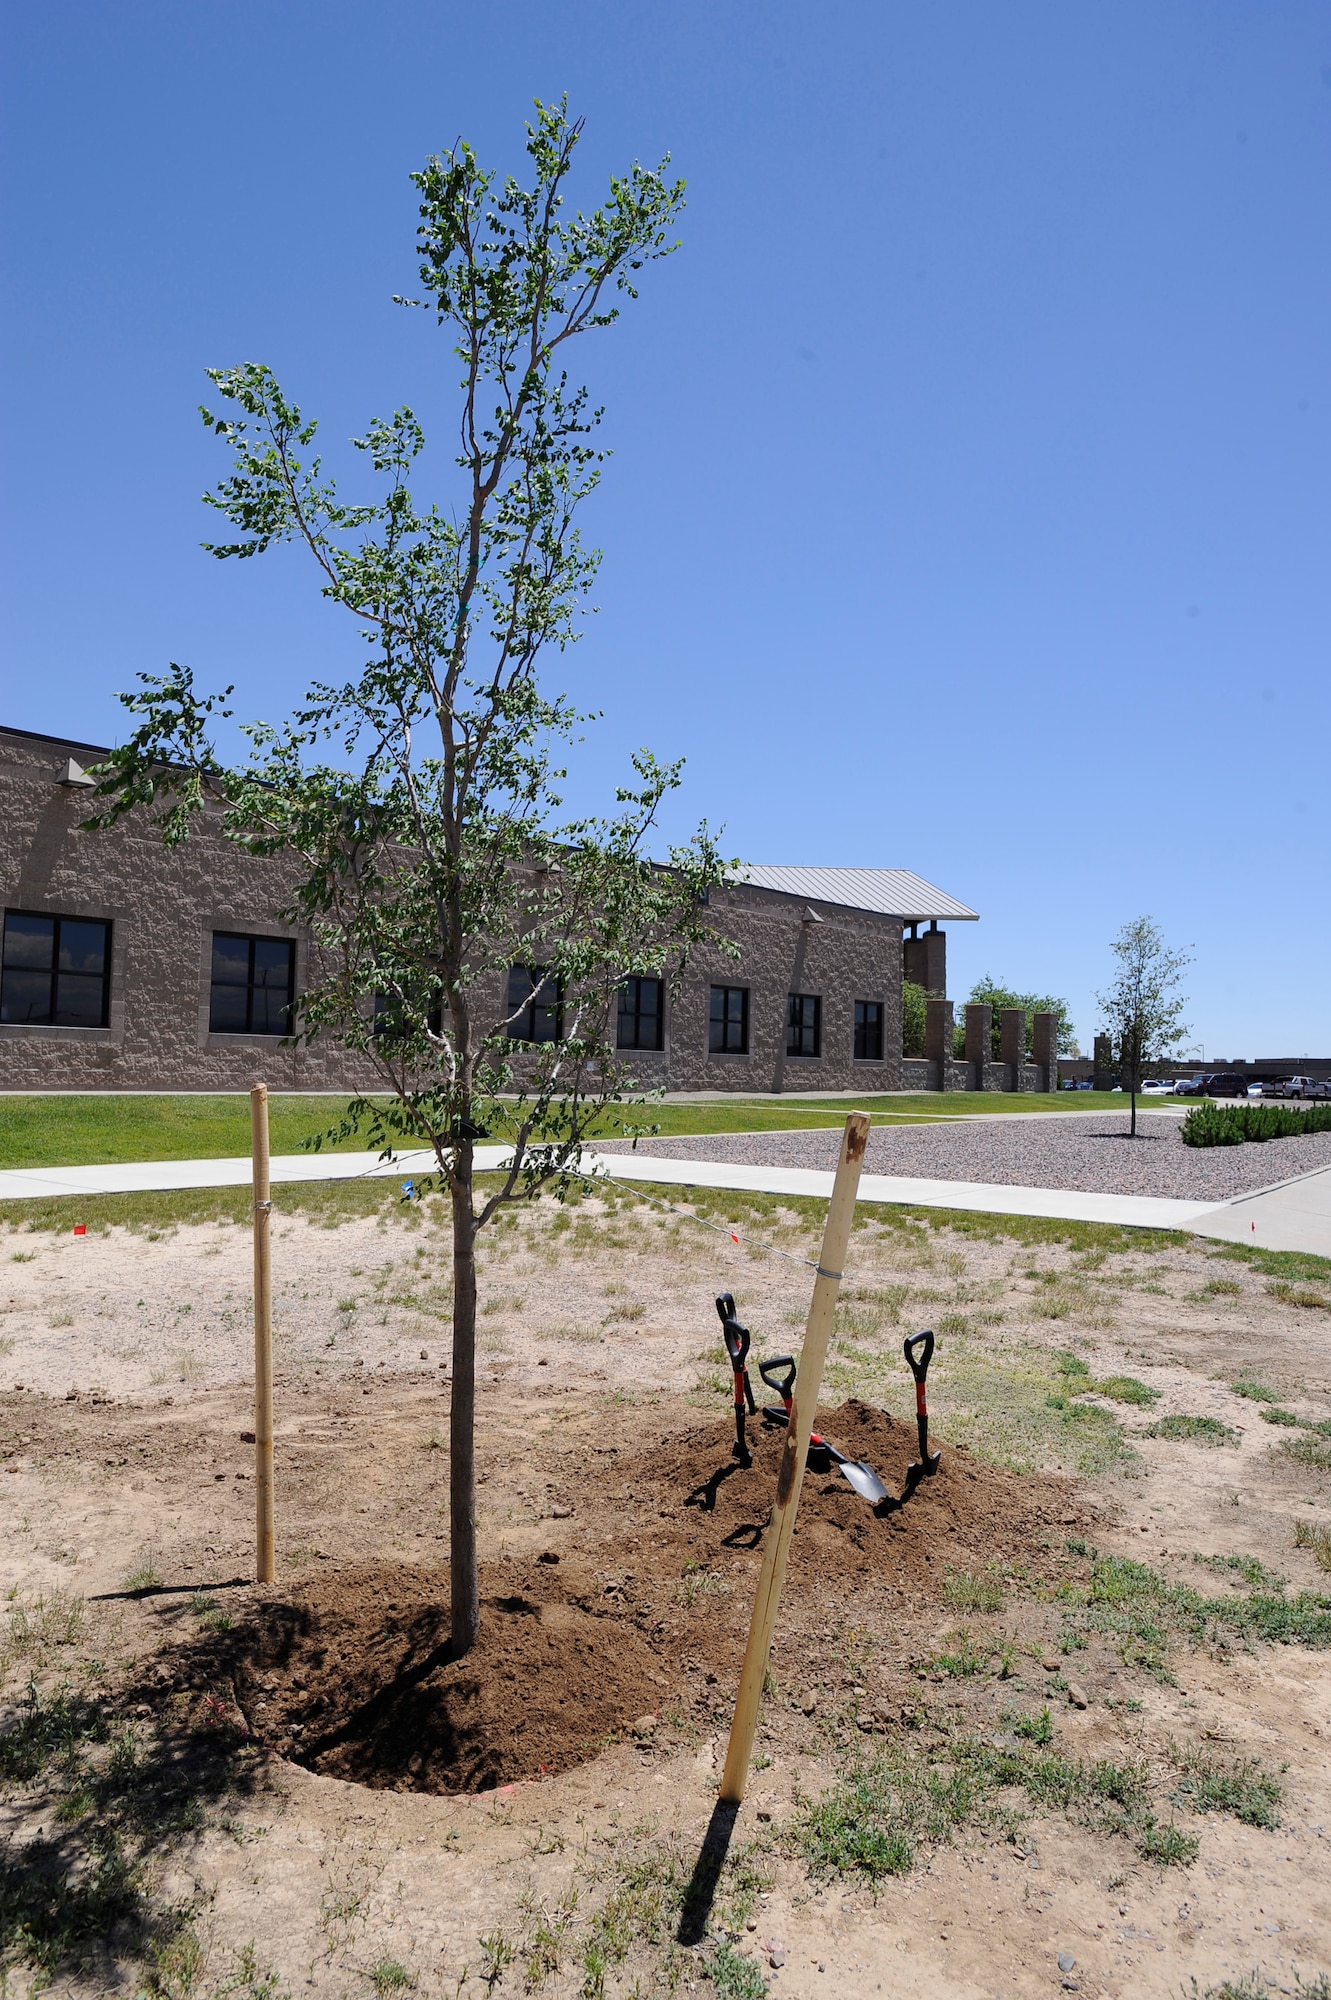 BUCKLEY AIR FORCE BASE, Colo. -- Members of Team Buckley planted this tree during the Arbor Day Celebration June 30. (U.S. Air Force photo by Staff Sgt. Dallas Edwards)